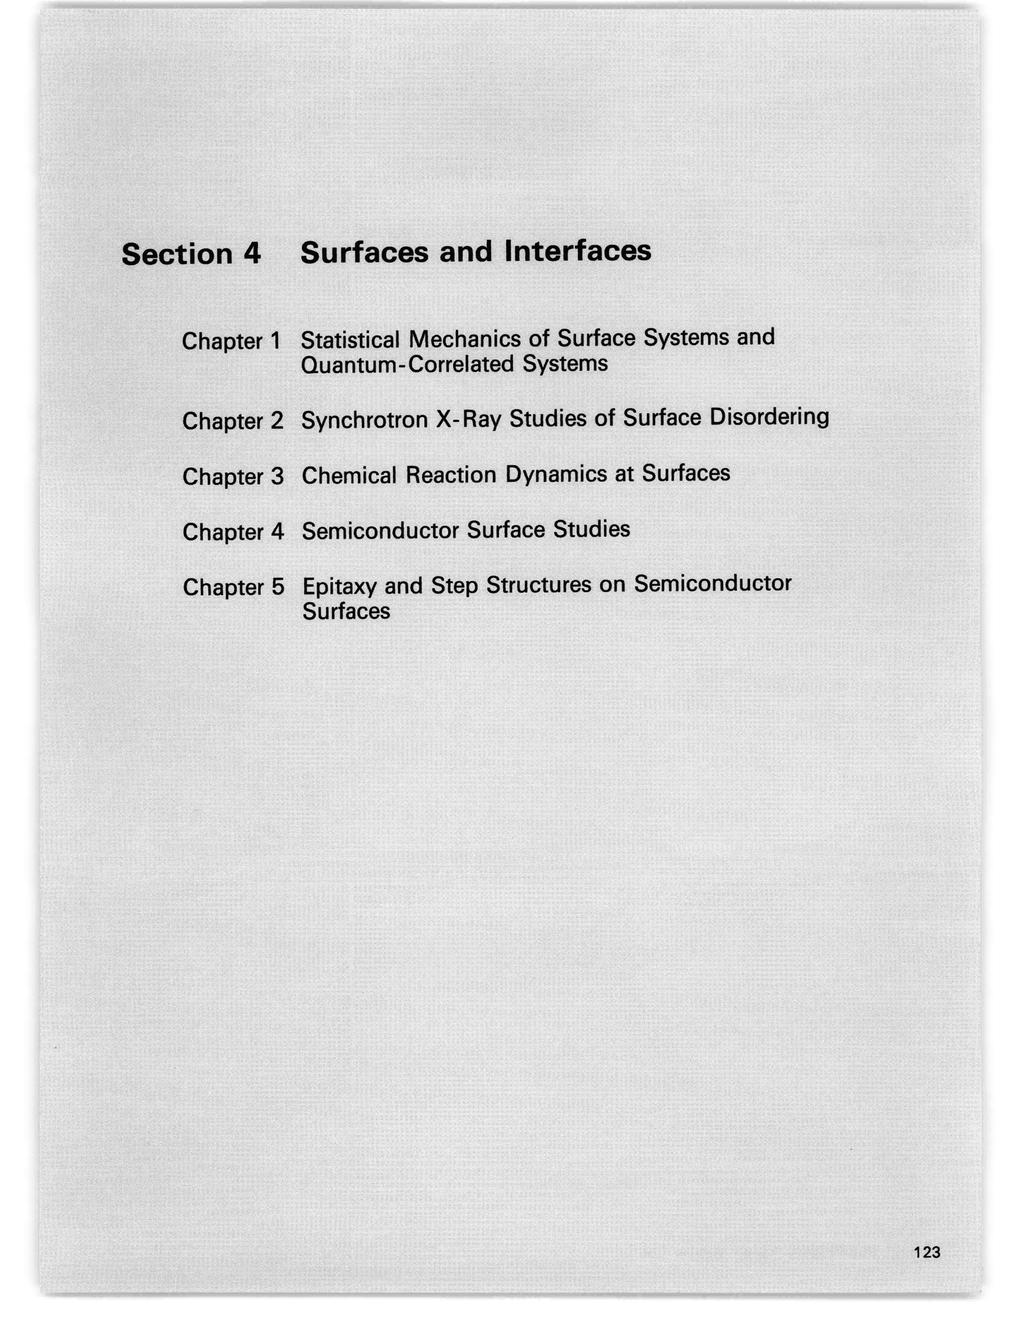 Sction 4 Surfaces and Interfaces Chapter 1 Statistical Mechanics of Surface Systems and Quantum- Correlated Systems Chapter 2 Synchrotron X-Ray Studies of Surface